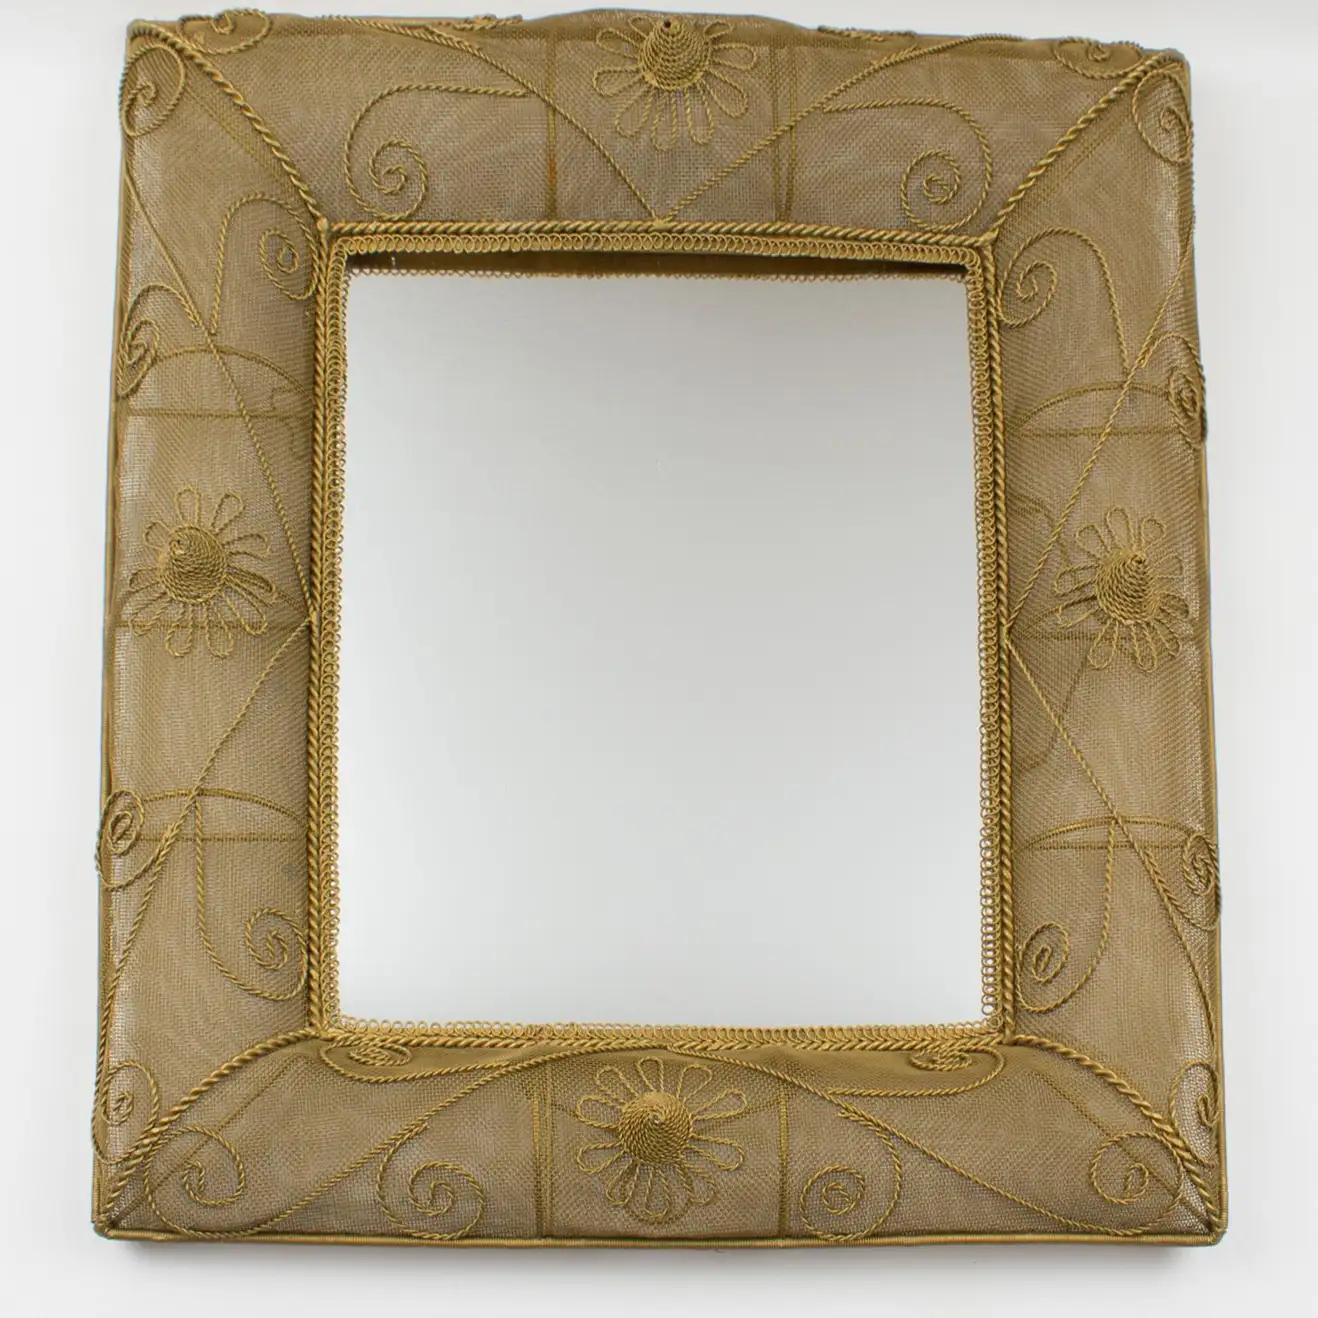 This elegant 1950s rectangular gilt metal wall-mounted mirror features interesting dimensional domed sides with raised detailing built with gilded metal mesh wire. The mirror can be placed in a landscape or portrait position thanks to two hooks at